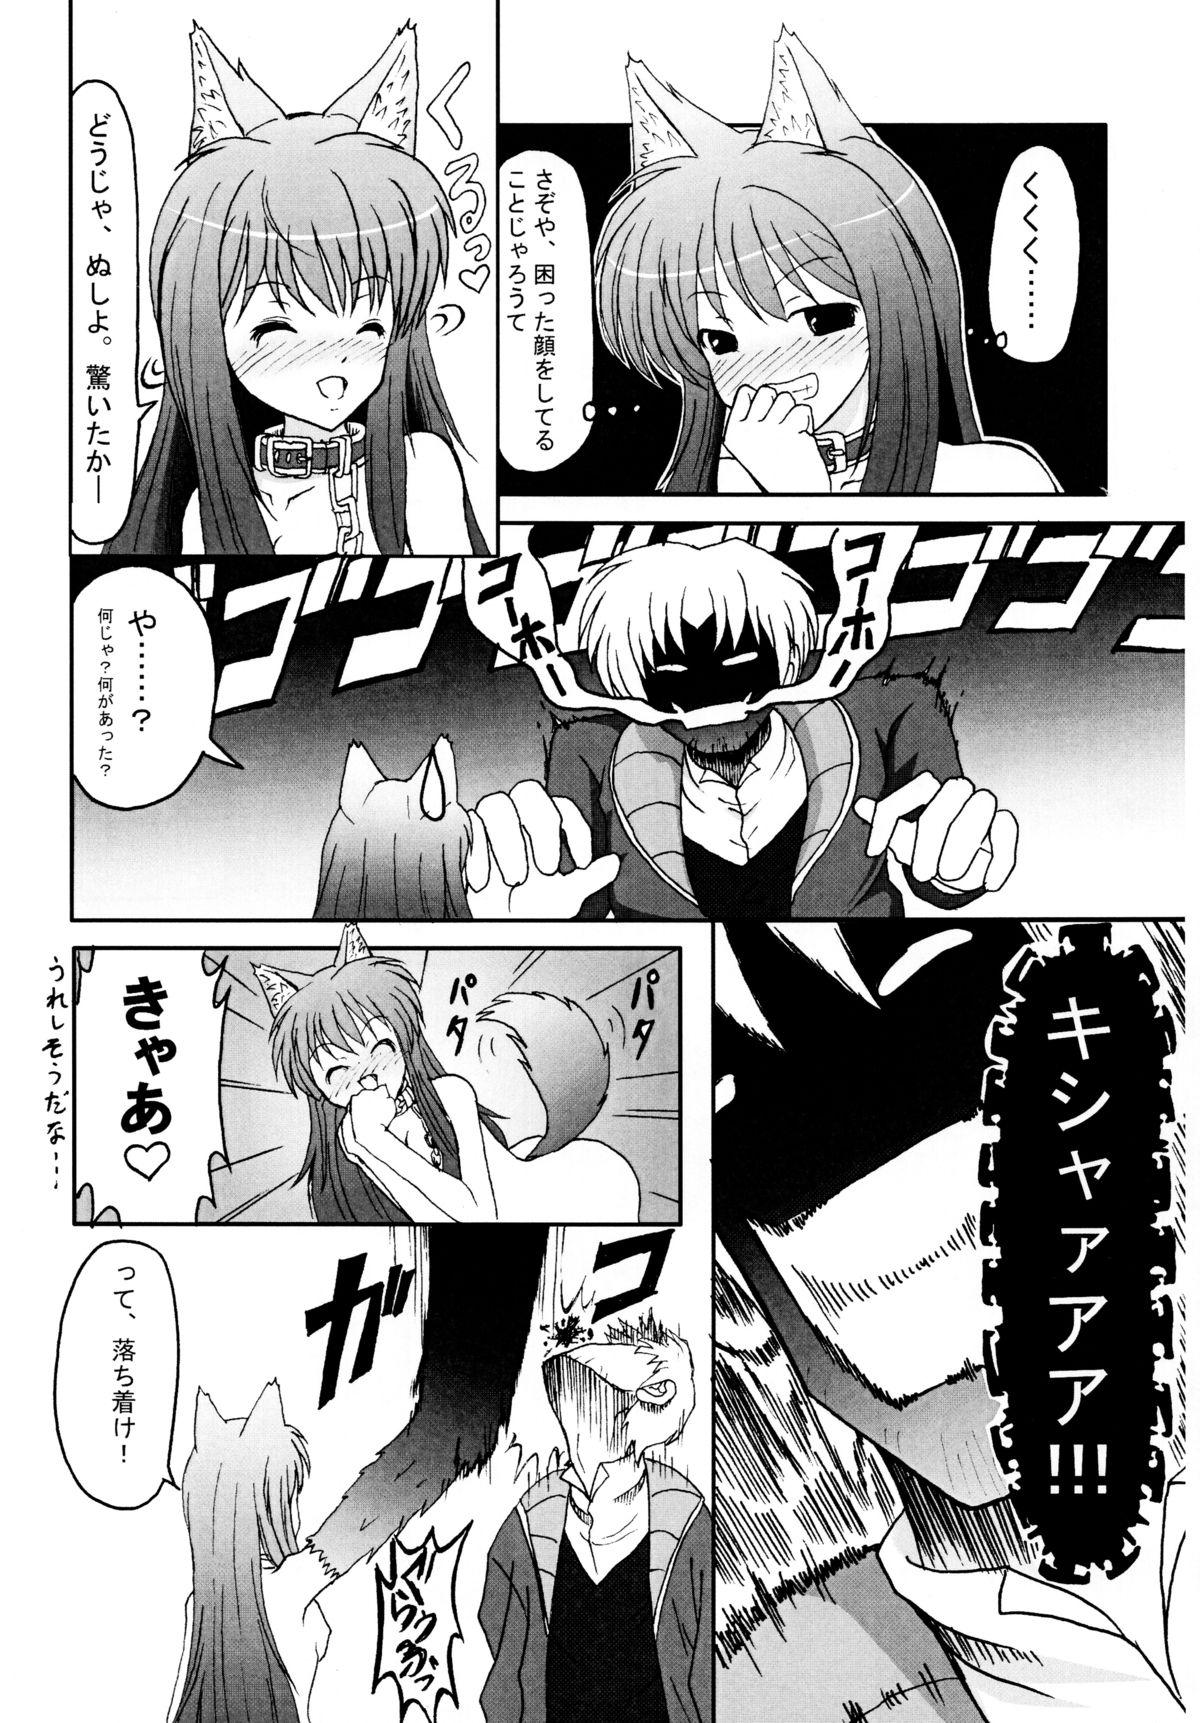 Mofos Ookami to Ai no Kusari - Spice and wolf Girl Sucking Dick - Page 9